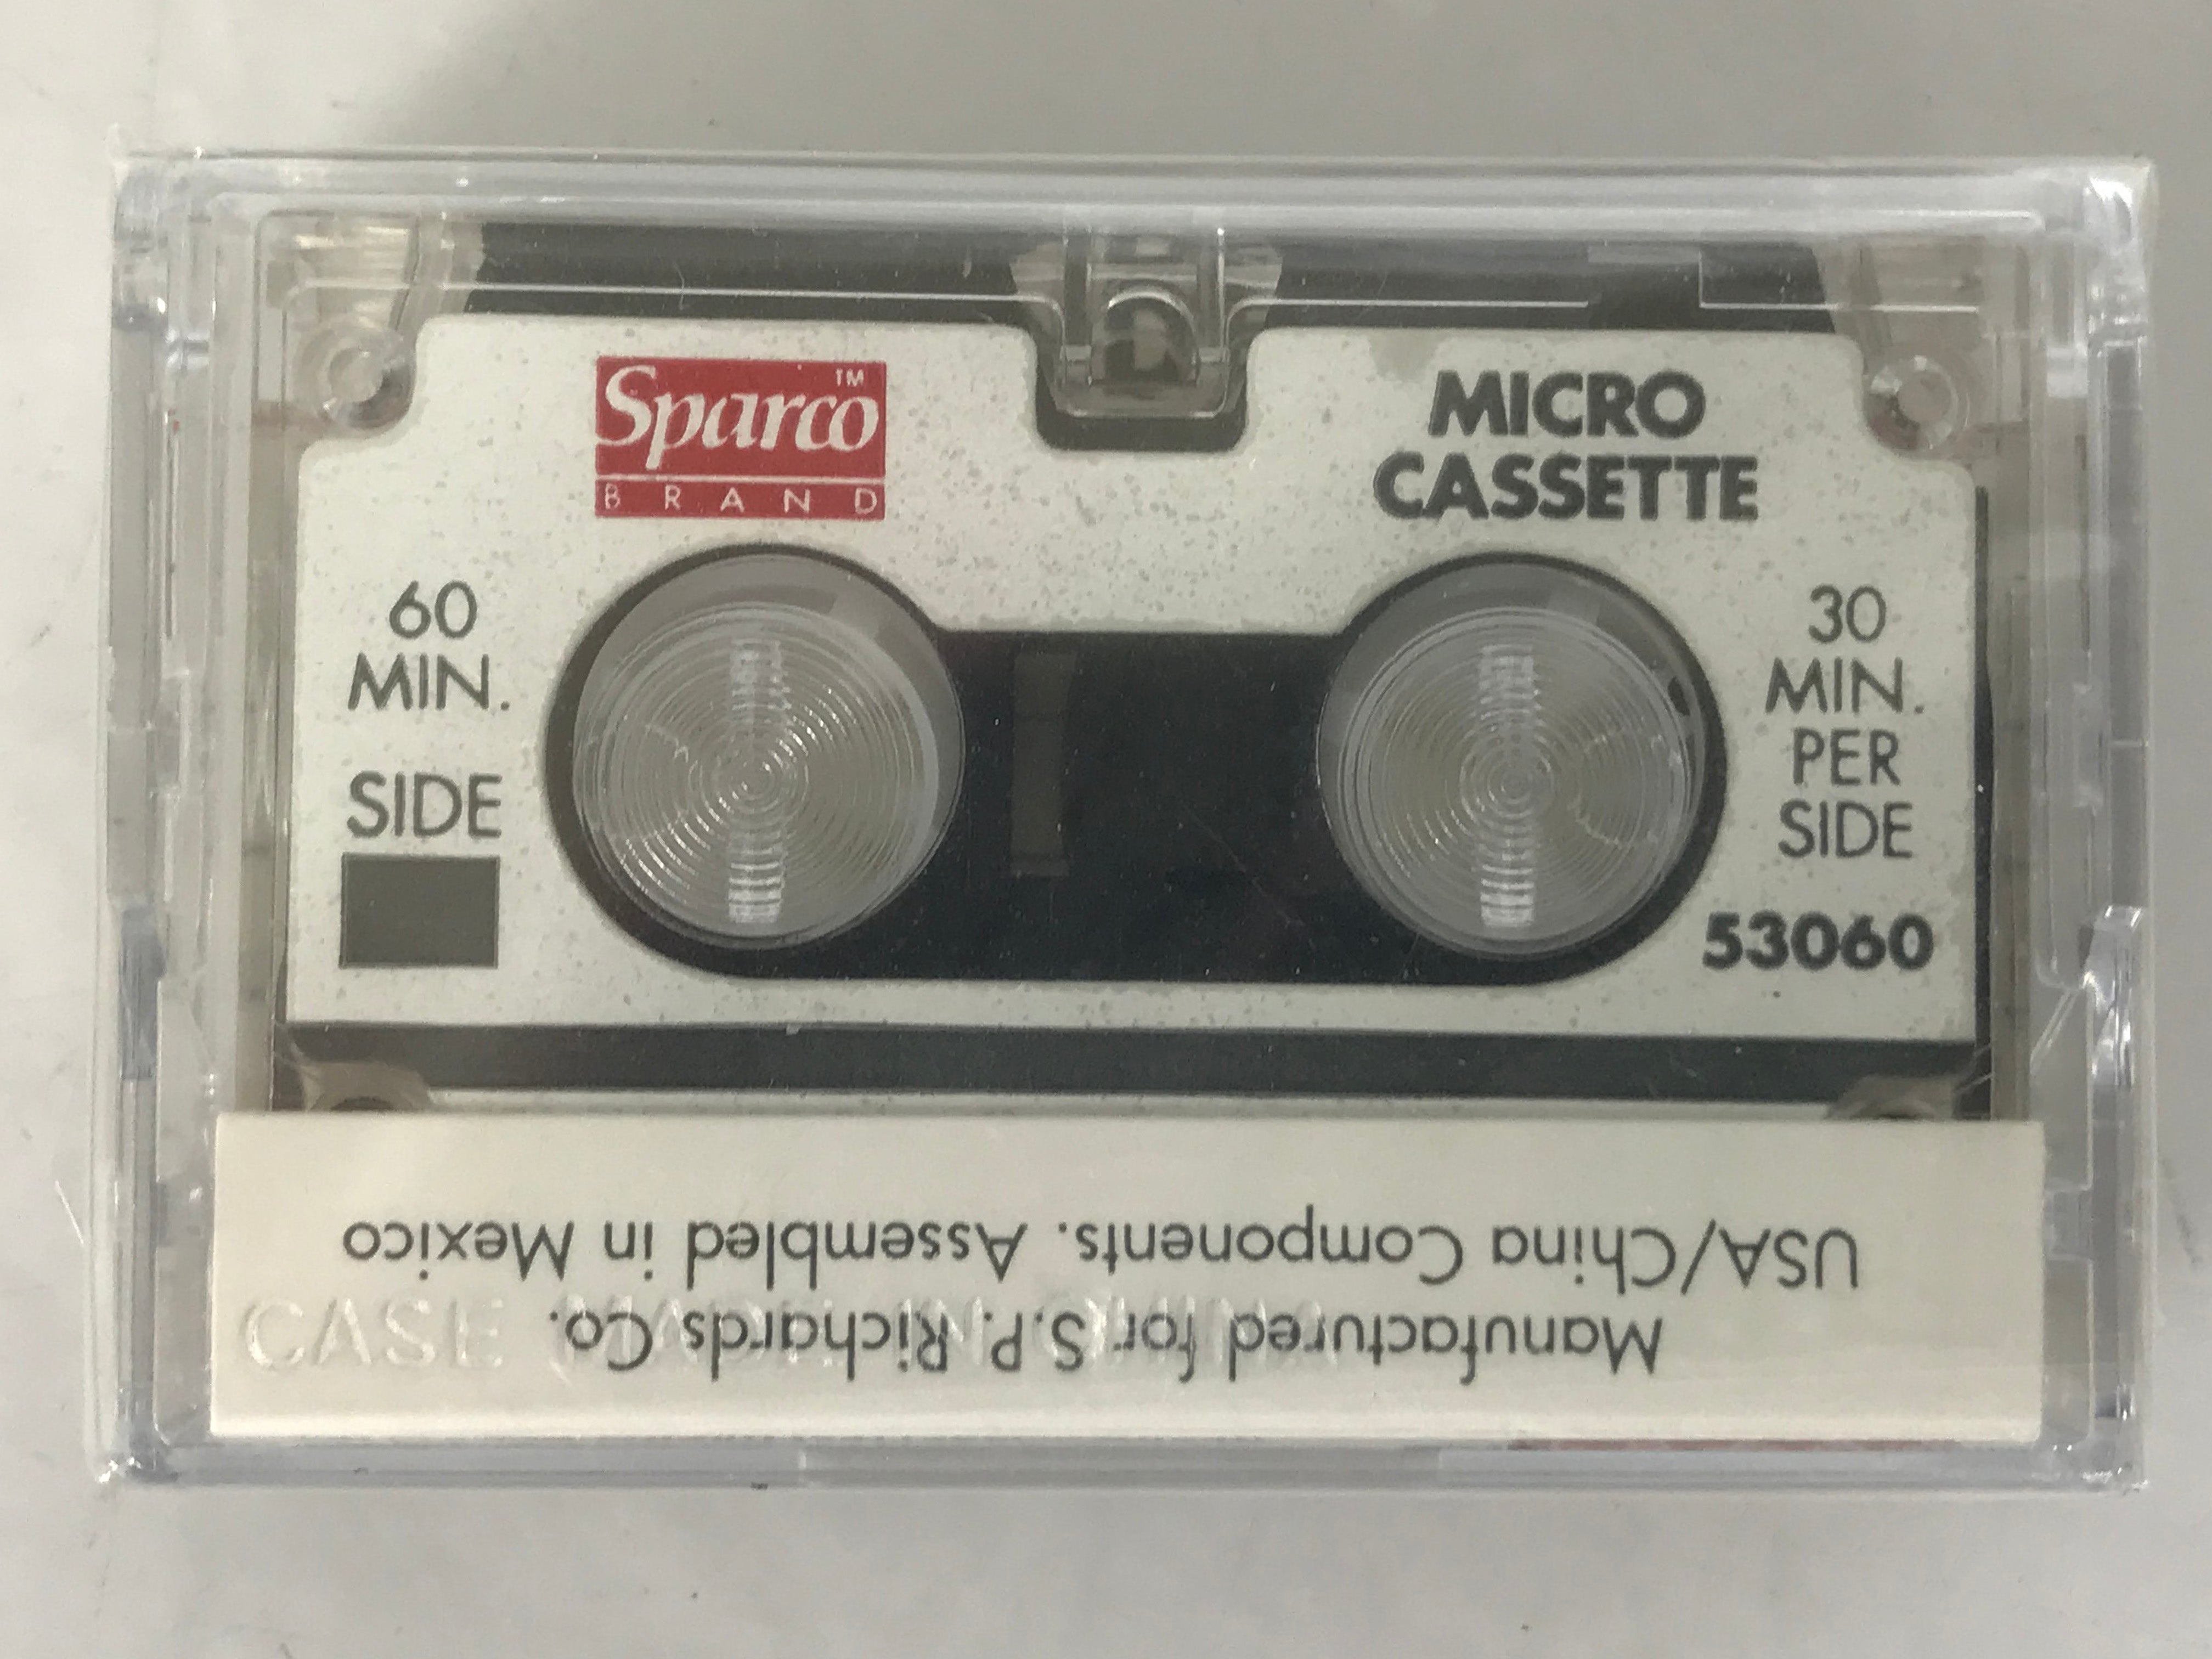 Sparco 53060 60min/30min MicroCassette Pack of 10